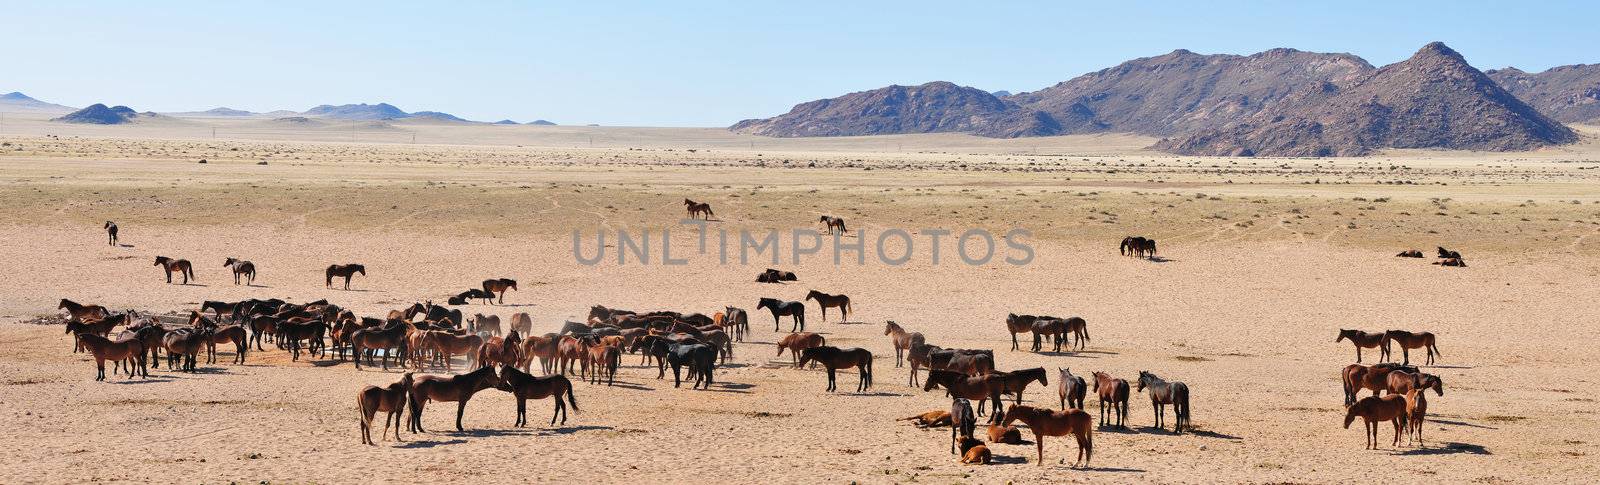 A panorama of the Wild Horses of the Namib made from three separate photos taken near Aus, Namibia.